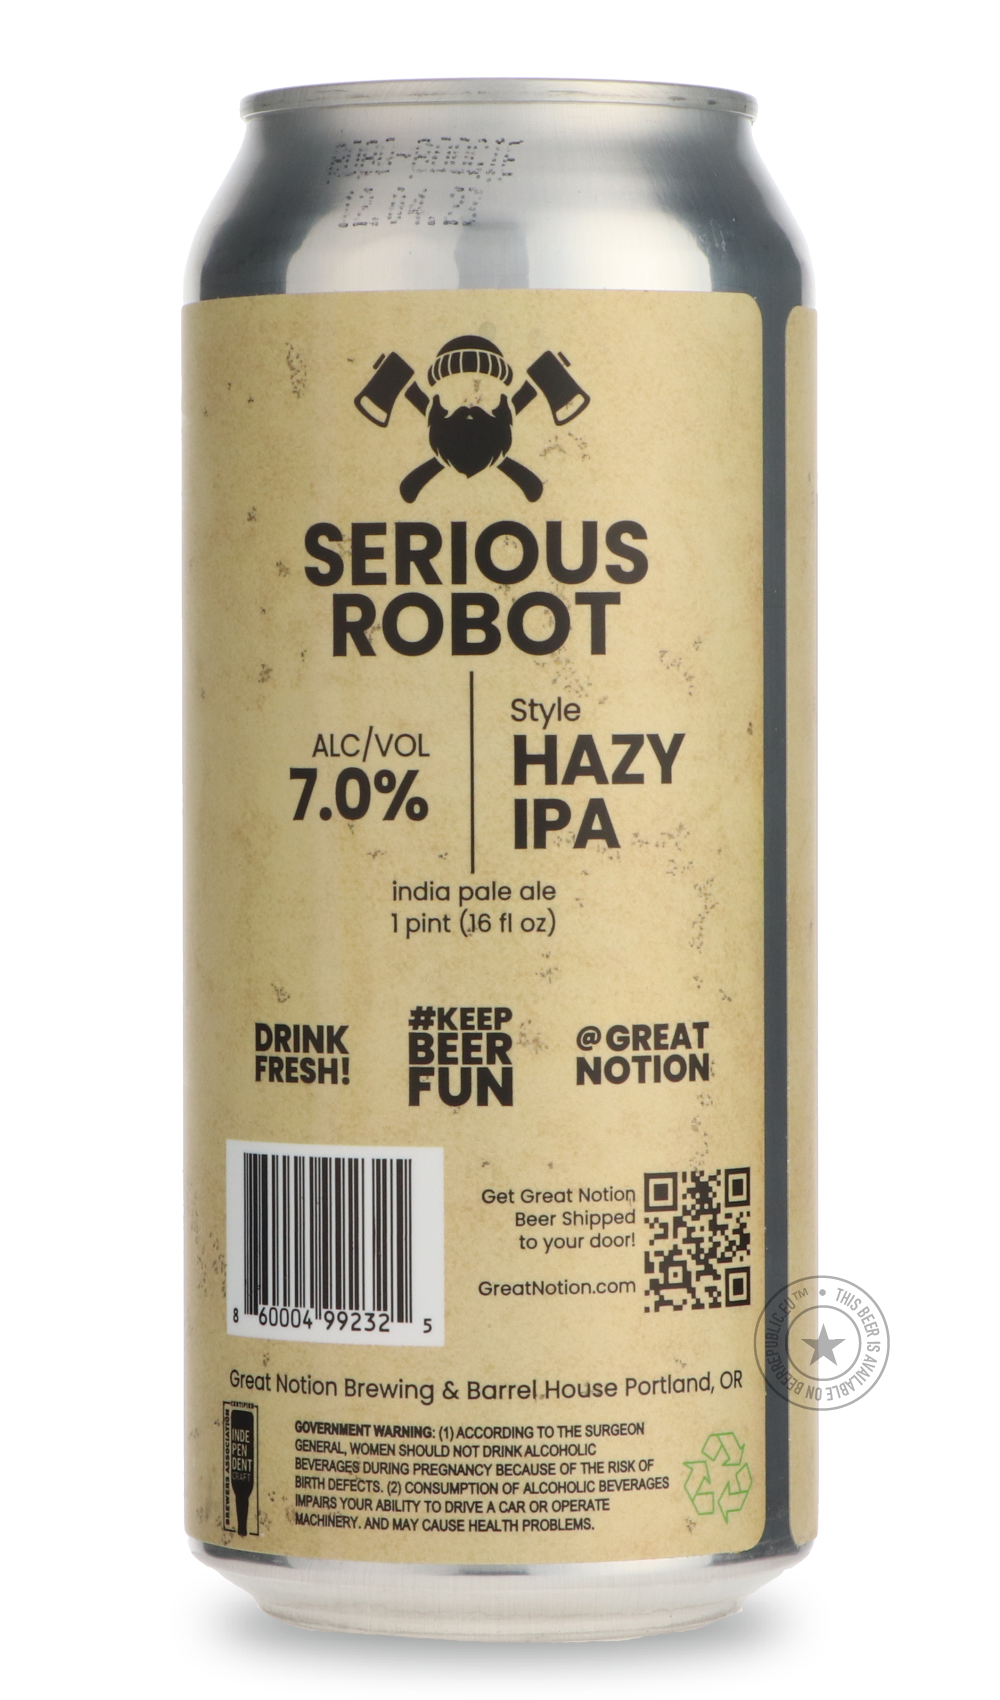 -Great Notion- Serious Robot-IPA- Only @ Beer Republic - The best online beer store for American & Canadian craft beer - Buy beer online from the USA and Canada - Bier online kopen - Amerikaans bier kopen - Craft beer store - Craft beer kopen - Amerikanisch bier kaufen - Bier online kaufen - Acheter biere online - IPA - Stout - Porter - New England IPA - Hazy IPA - Imperial Stout - Barrel Aged - Barrel Aged Imperial Stout - Brown - Dark beer - Blond - Blonde - Pilsner - Lager - Wheat - Weizen - Amber - Barl